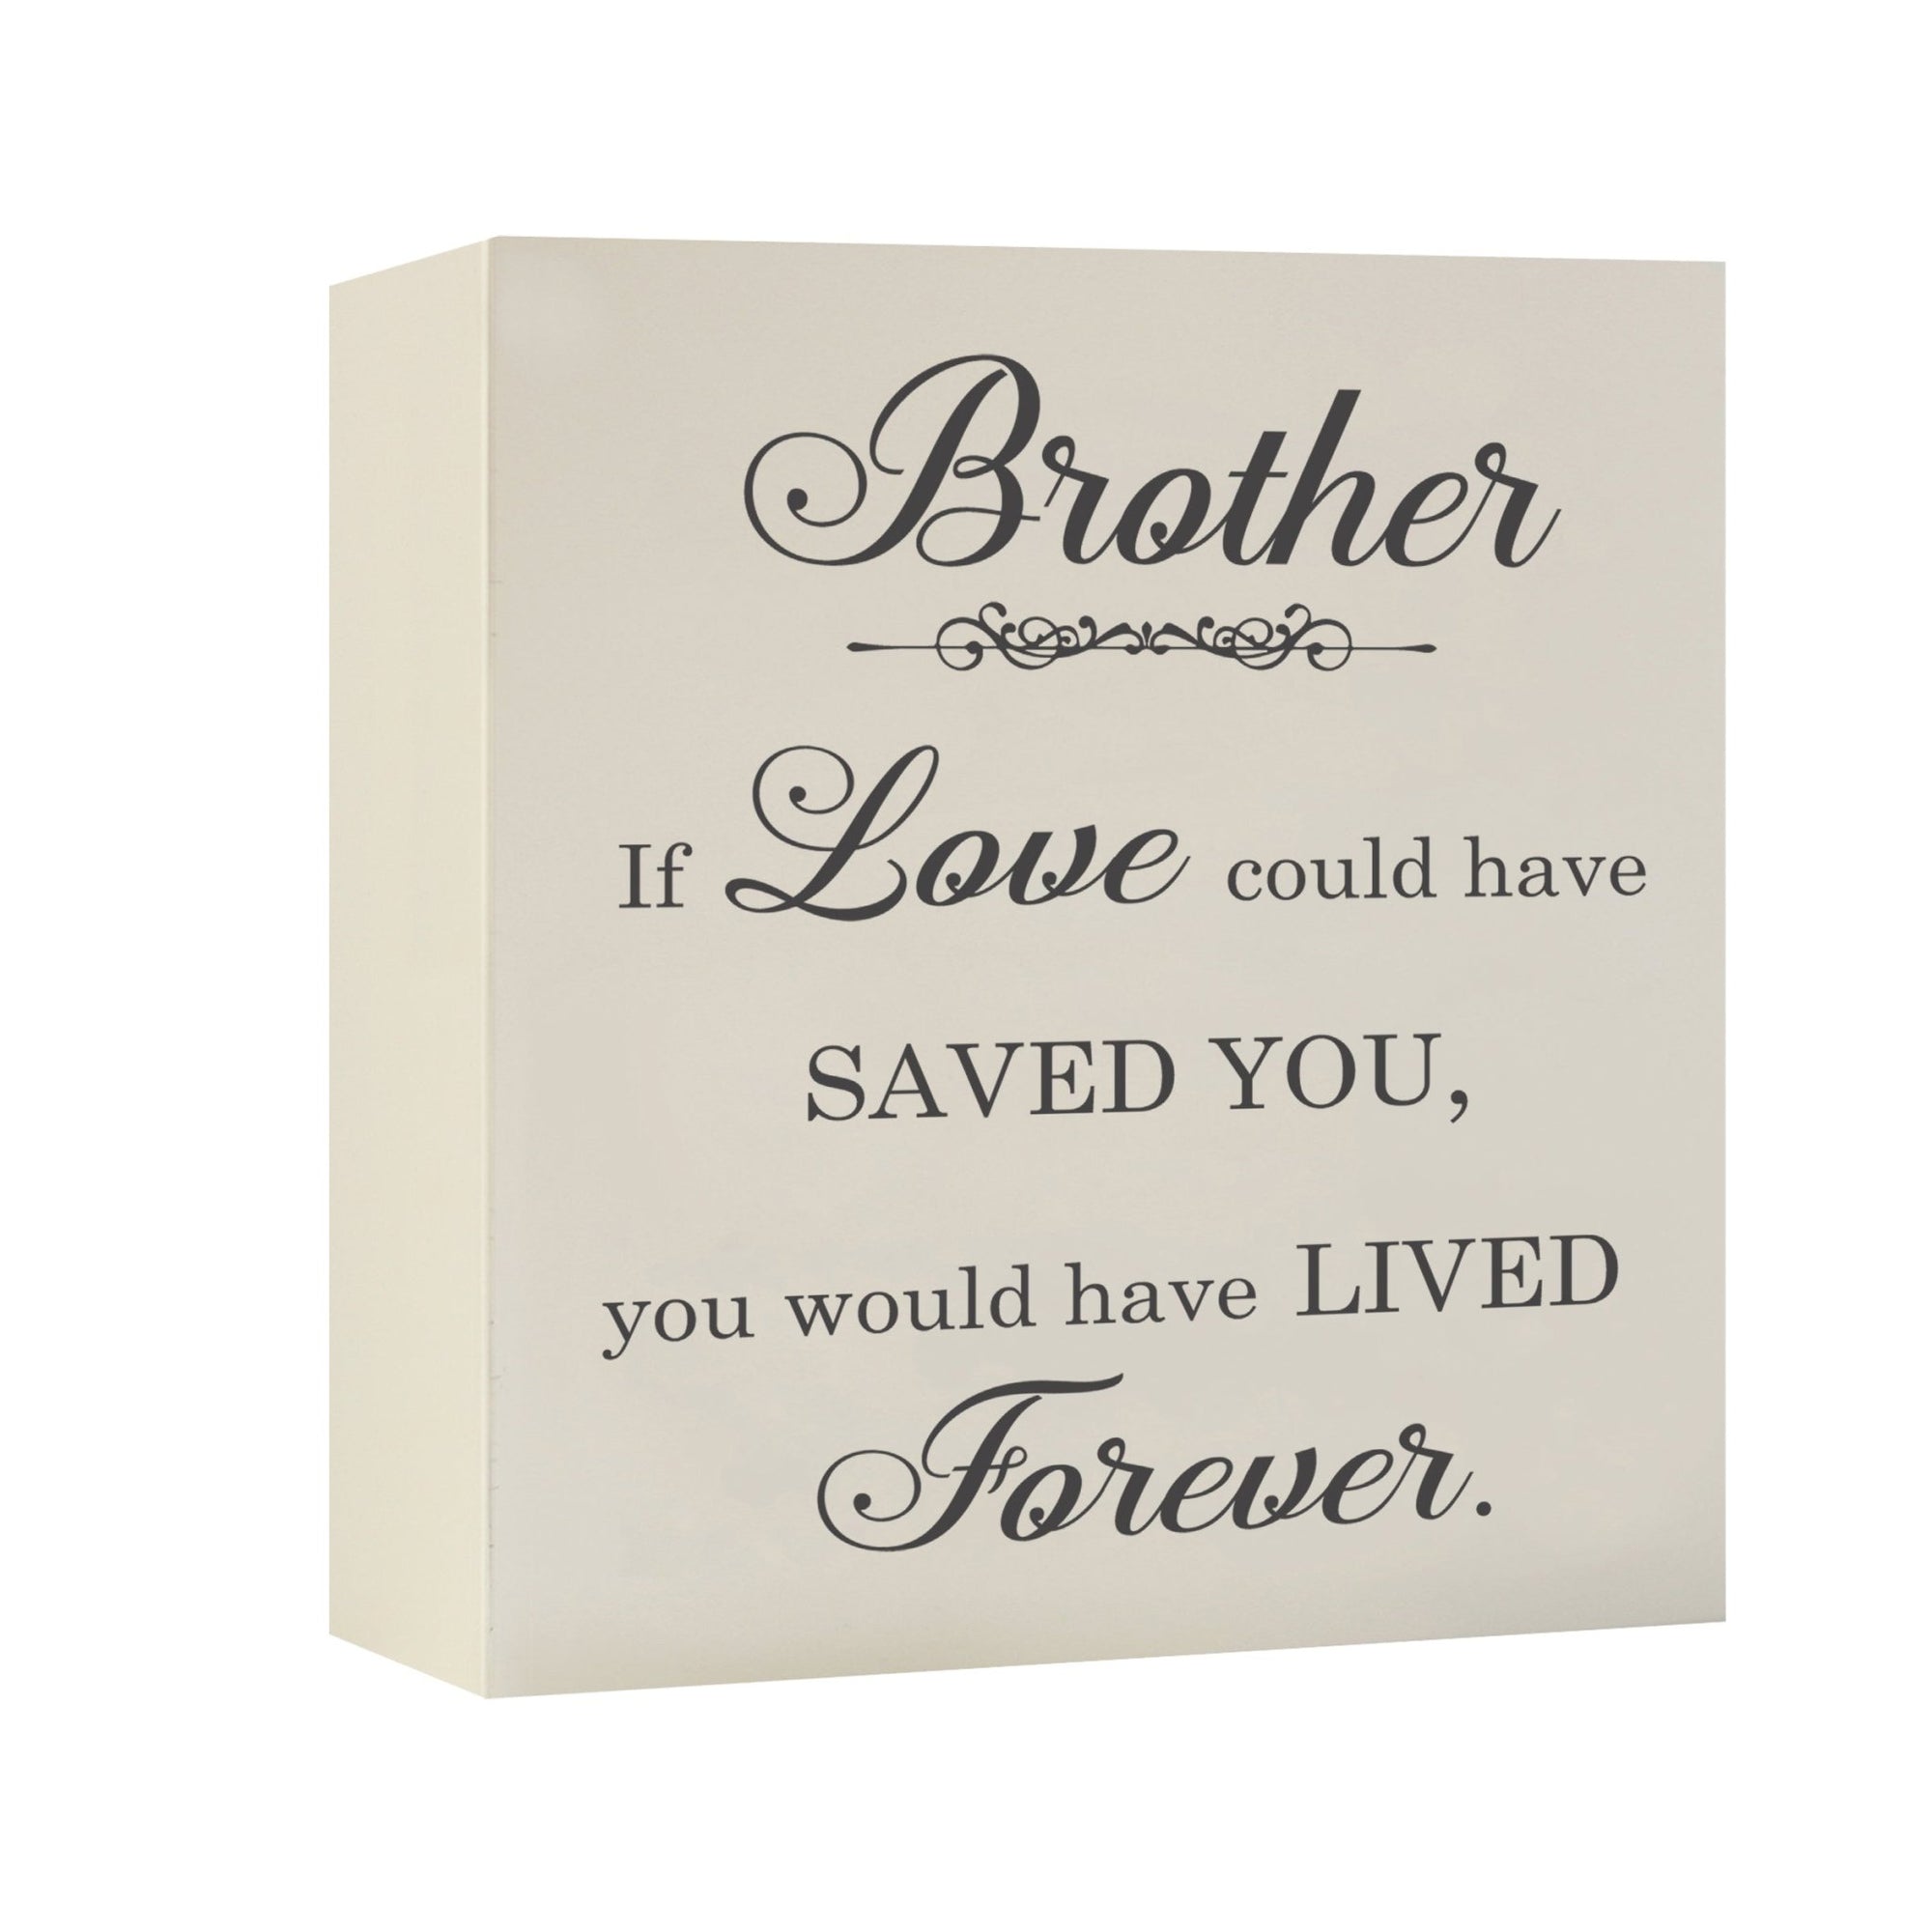 Memorial Keepsake Wooden Cremation Shadow Box and Urn 10x10in Holds 189 Cu Inches Of Human Ashes Brother, If Love Could - LifeSong Milestones